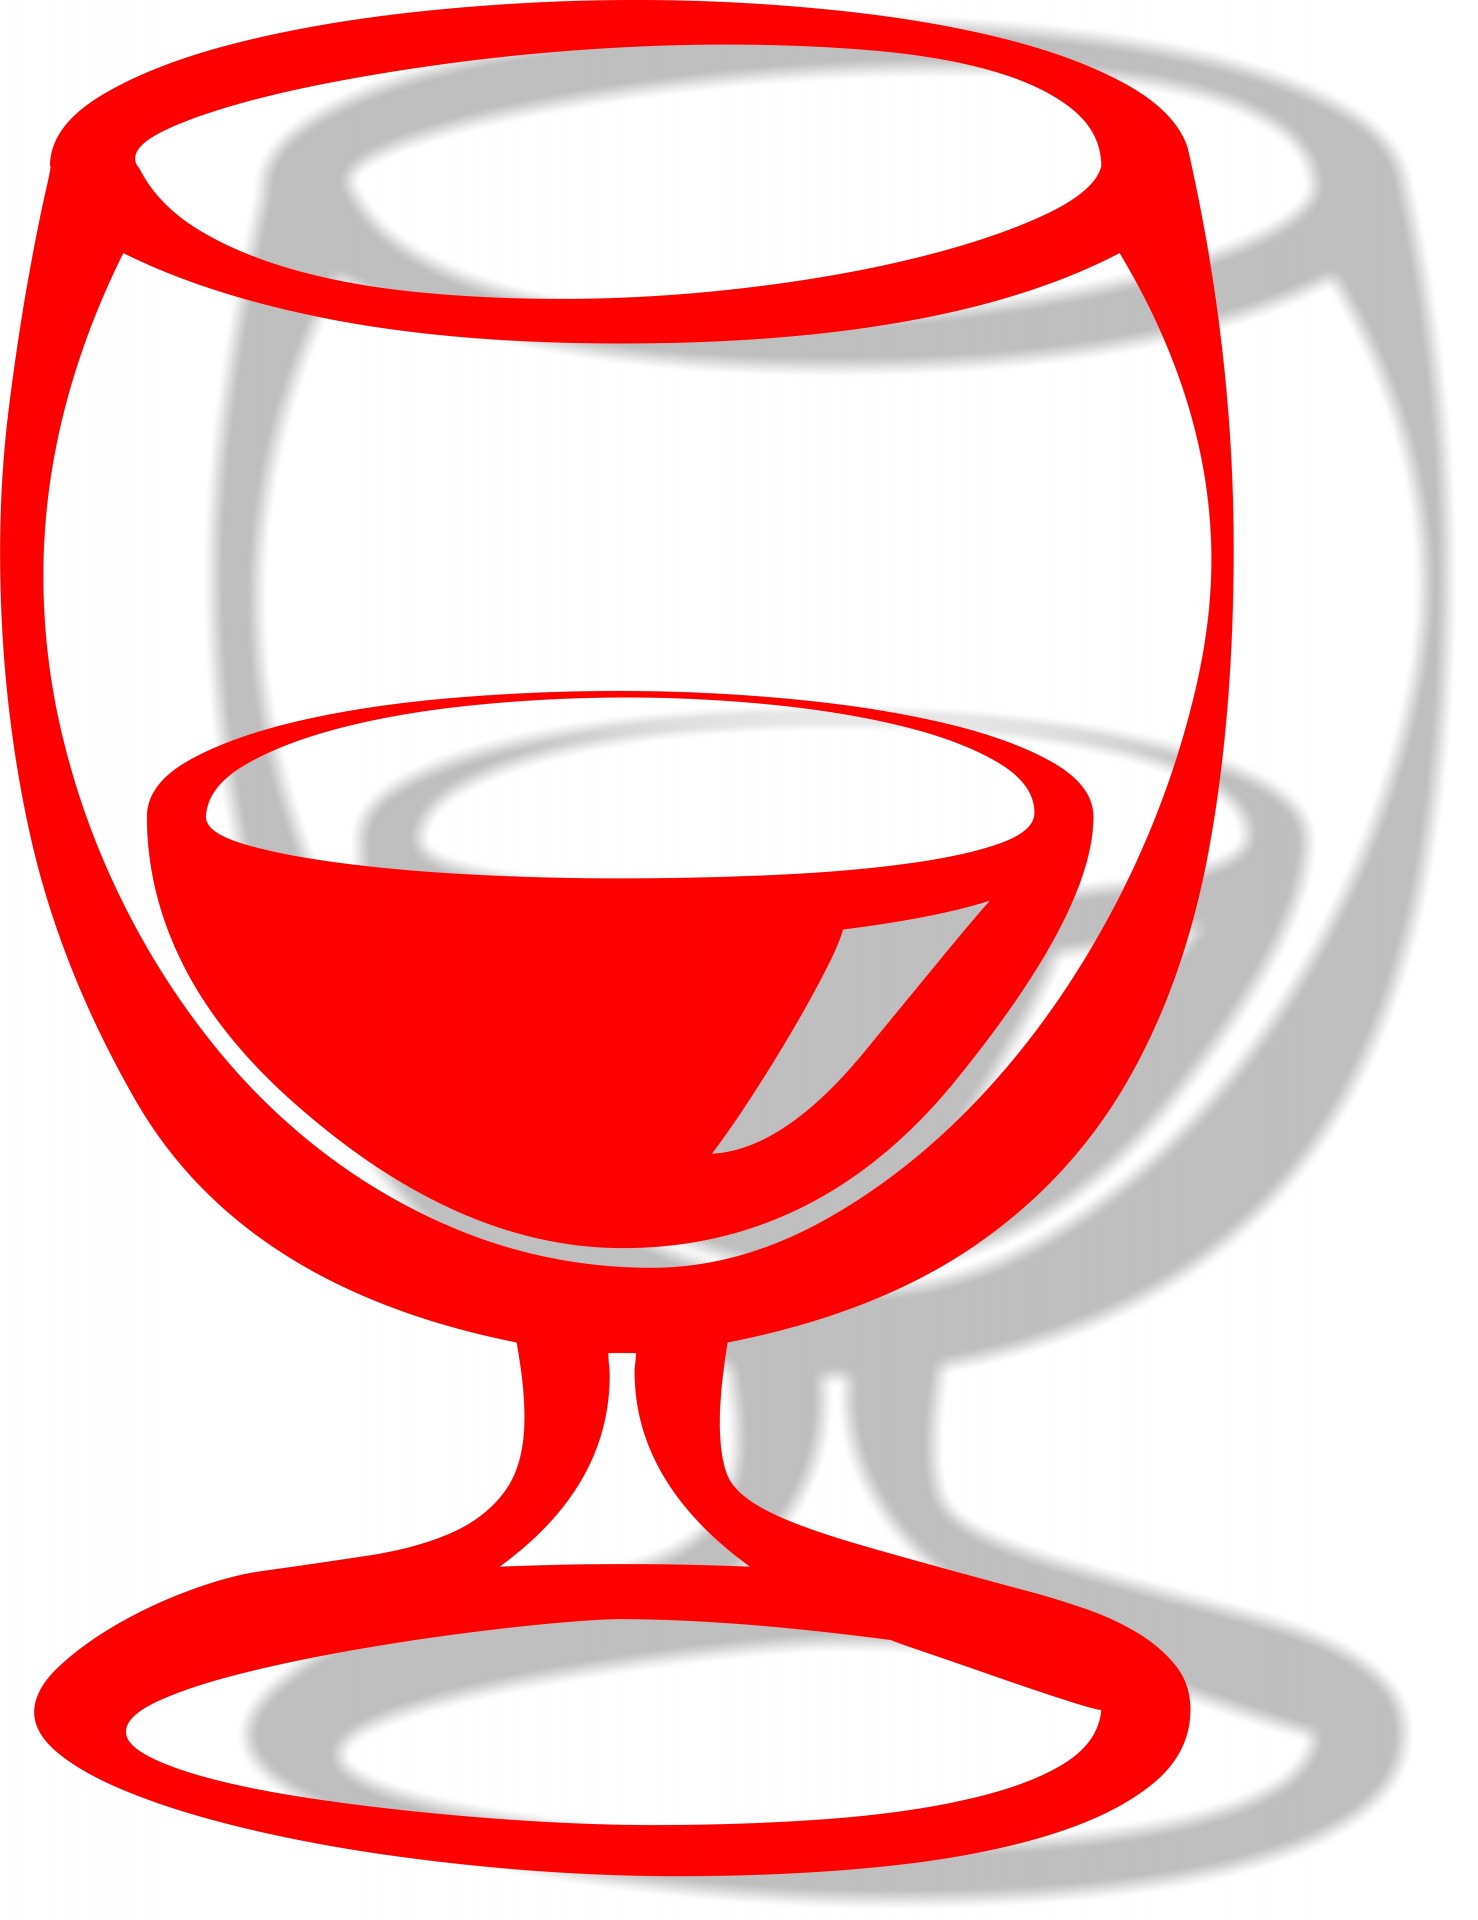 red glass drawing free photo